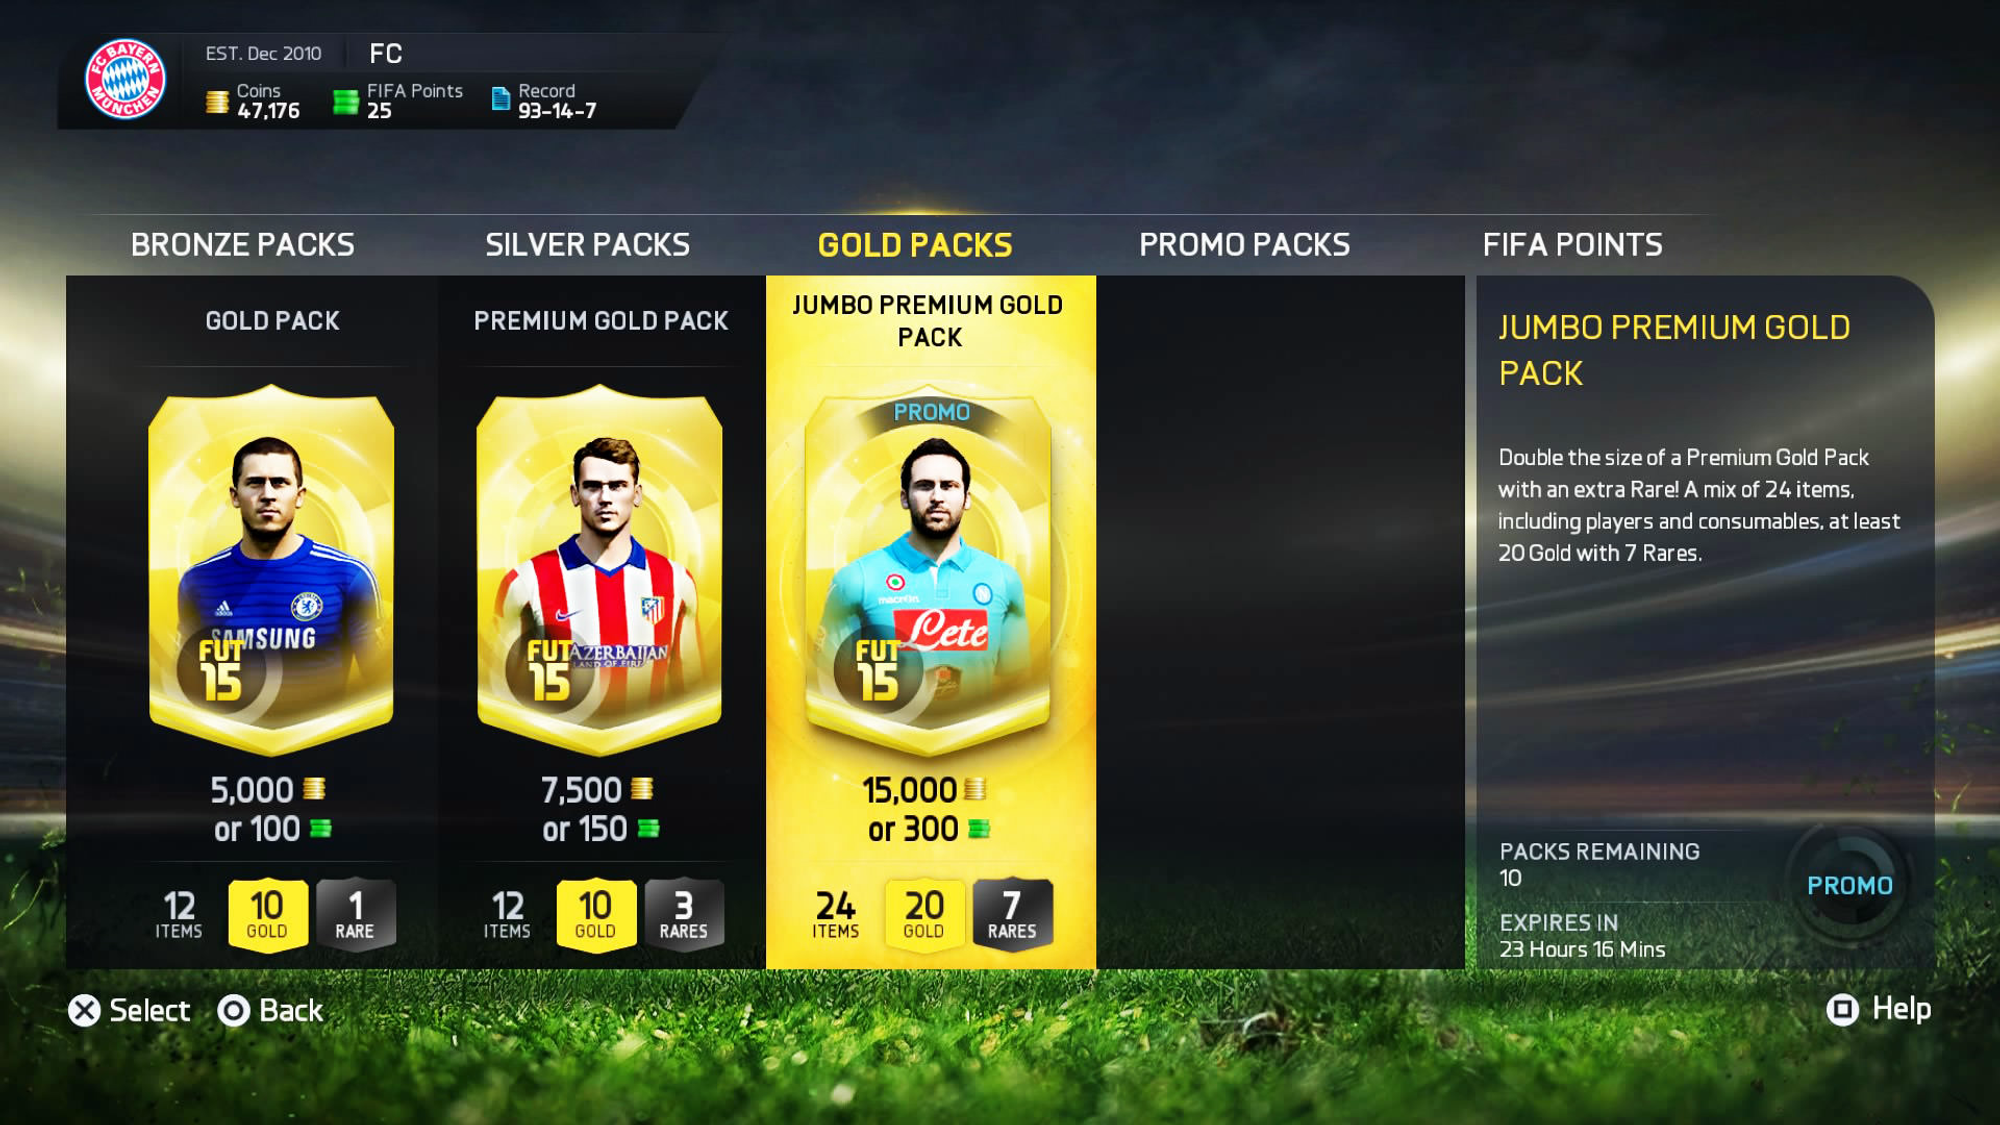 Fifa: Virtual packs can be bought, containing random football players. Source